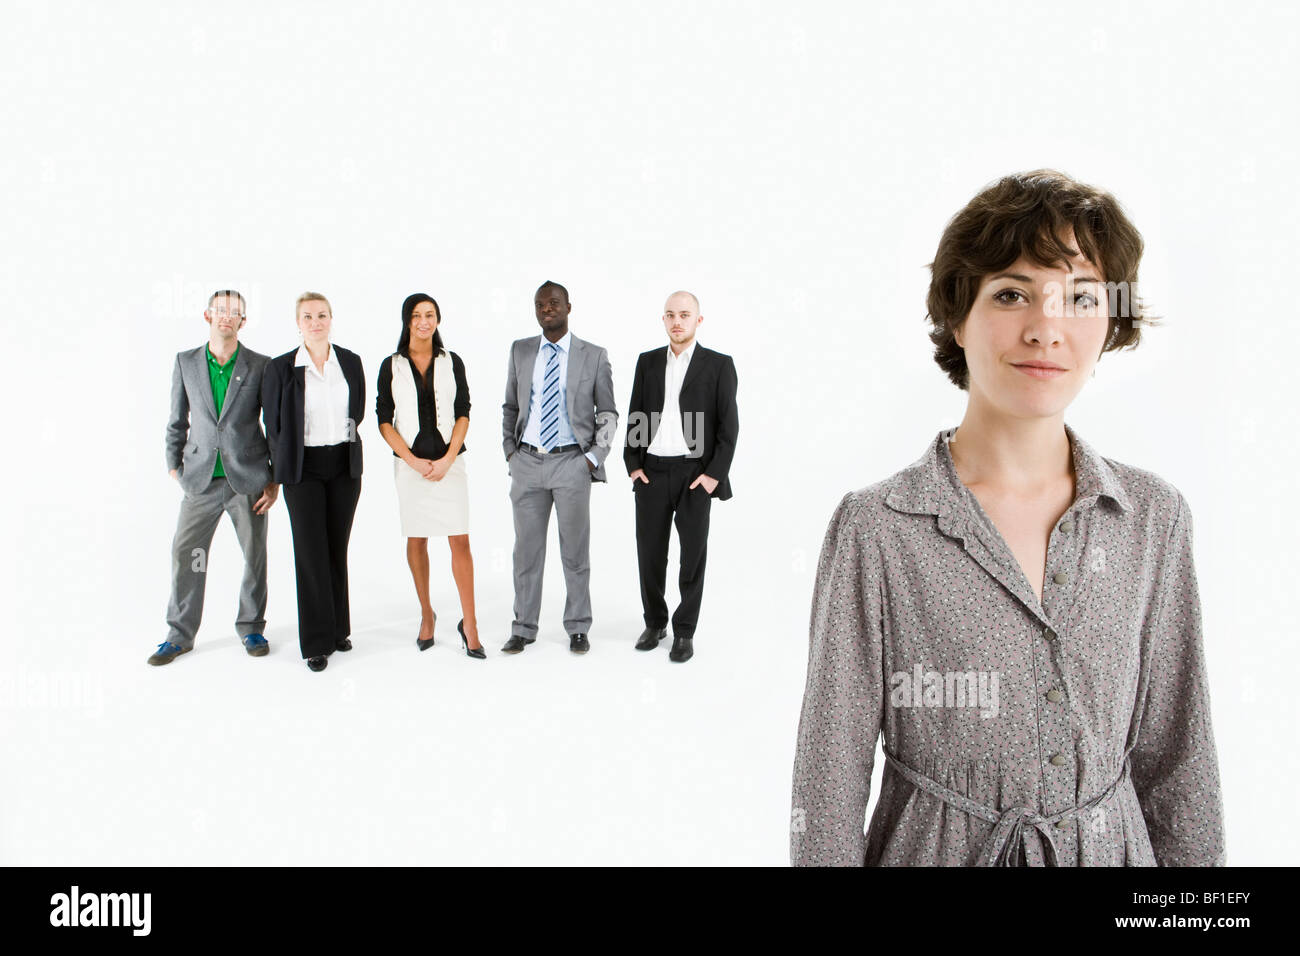 A young professional in front of a row of business people Stock Photo